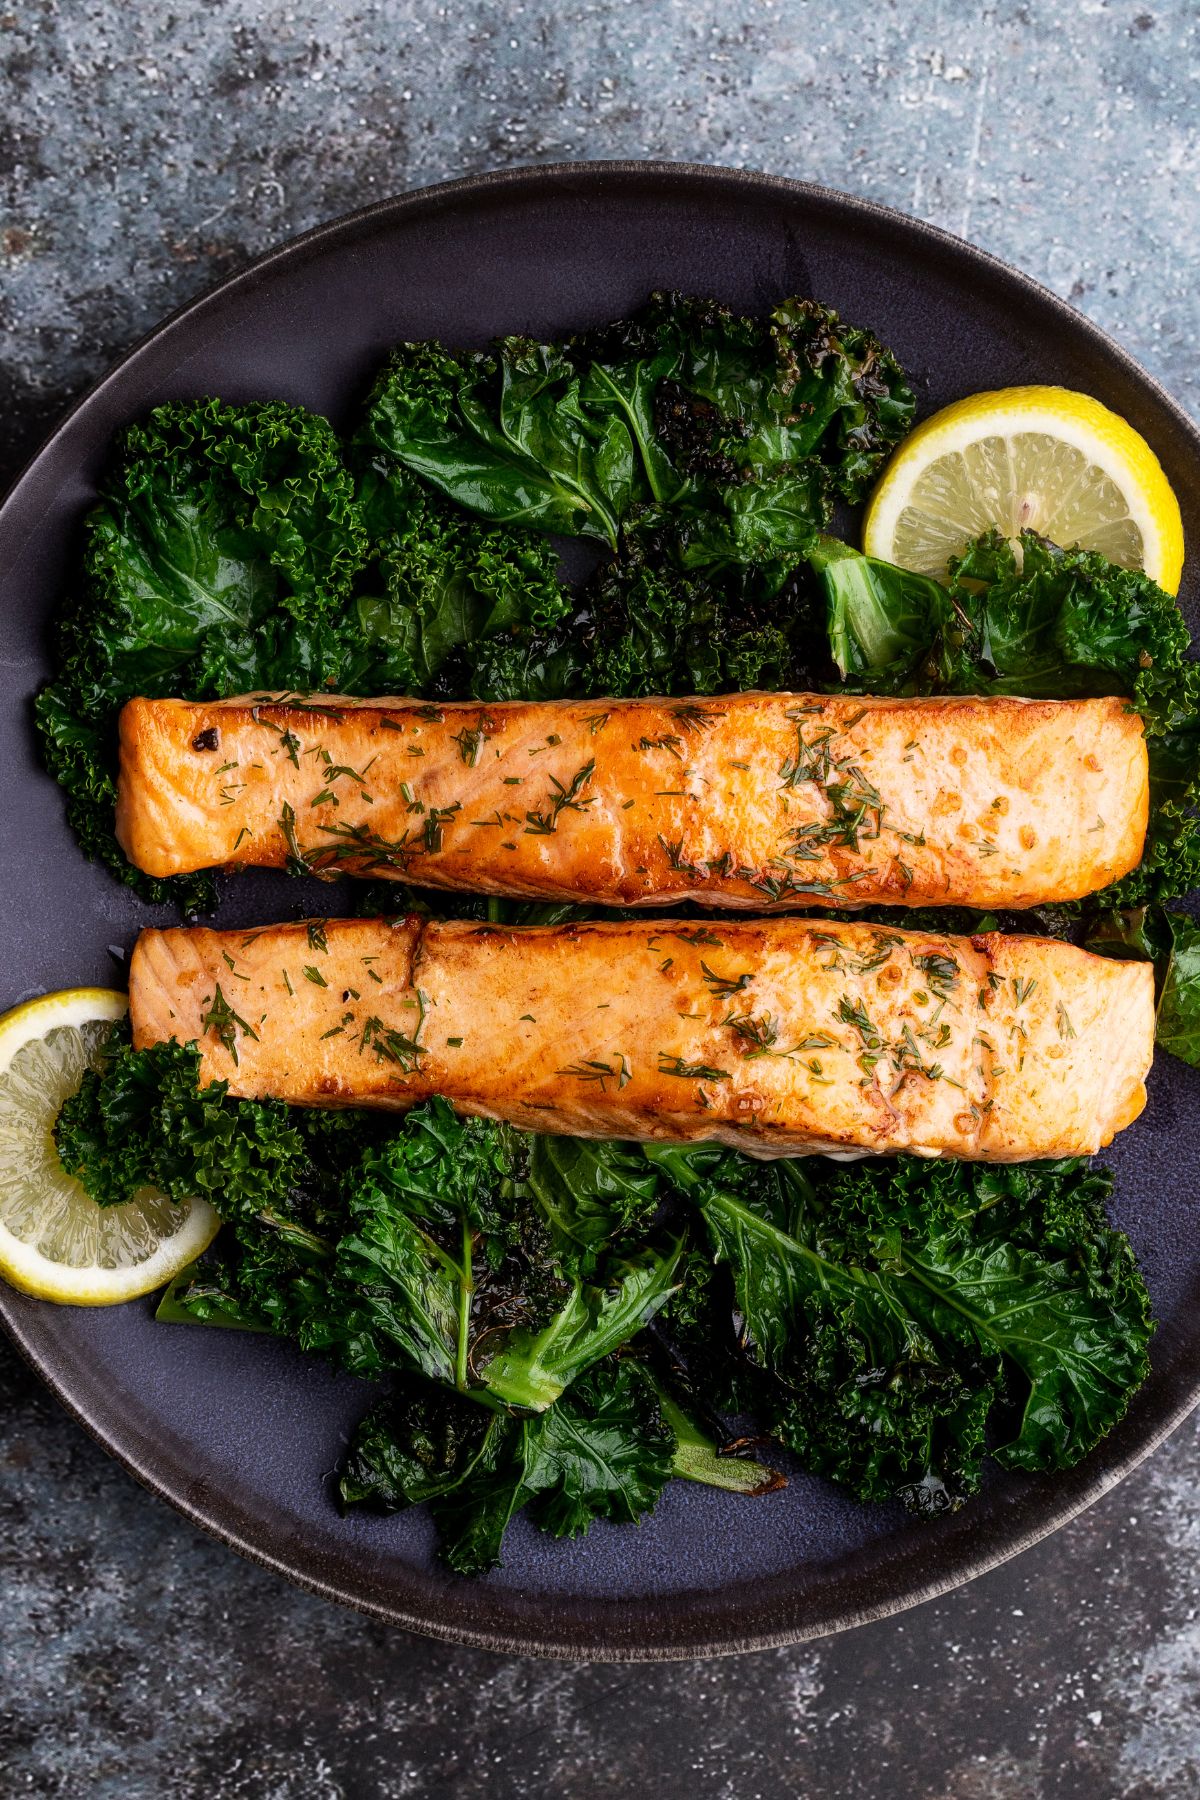 a plate of salmon and kale garnished with lemon.